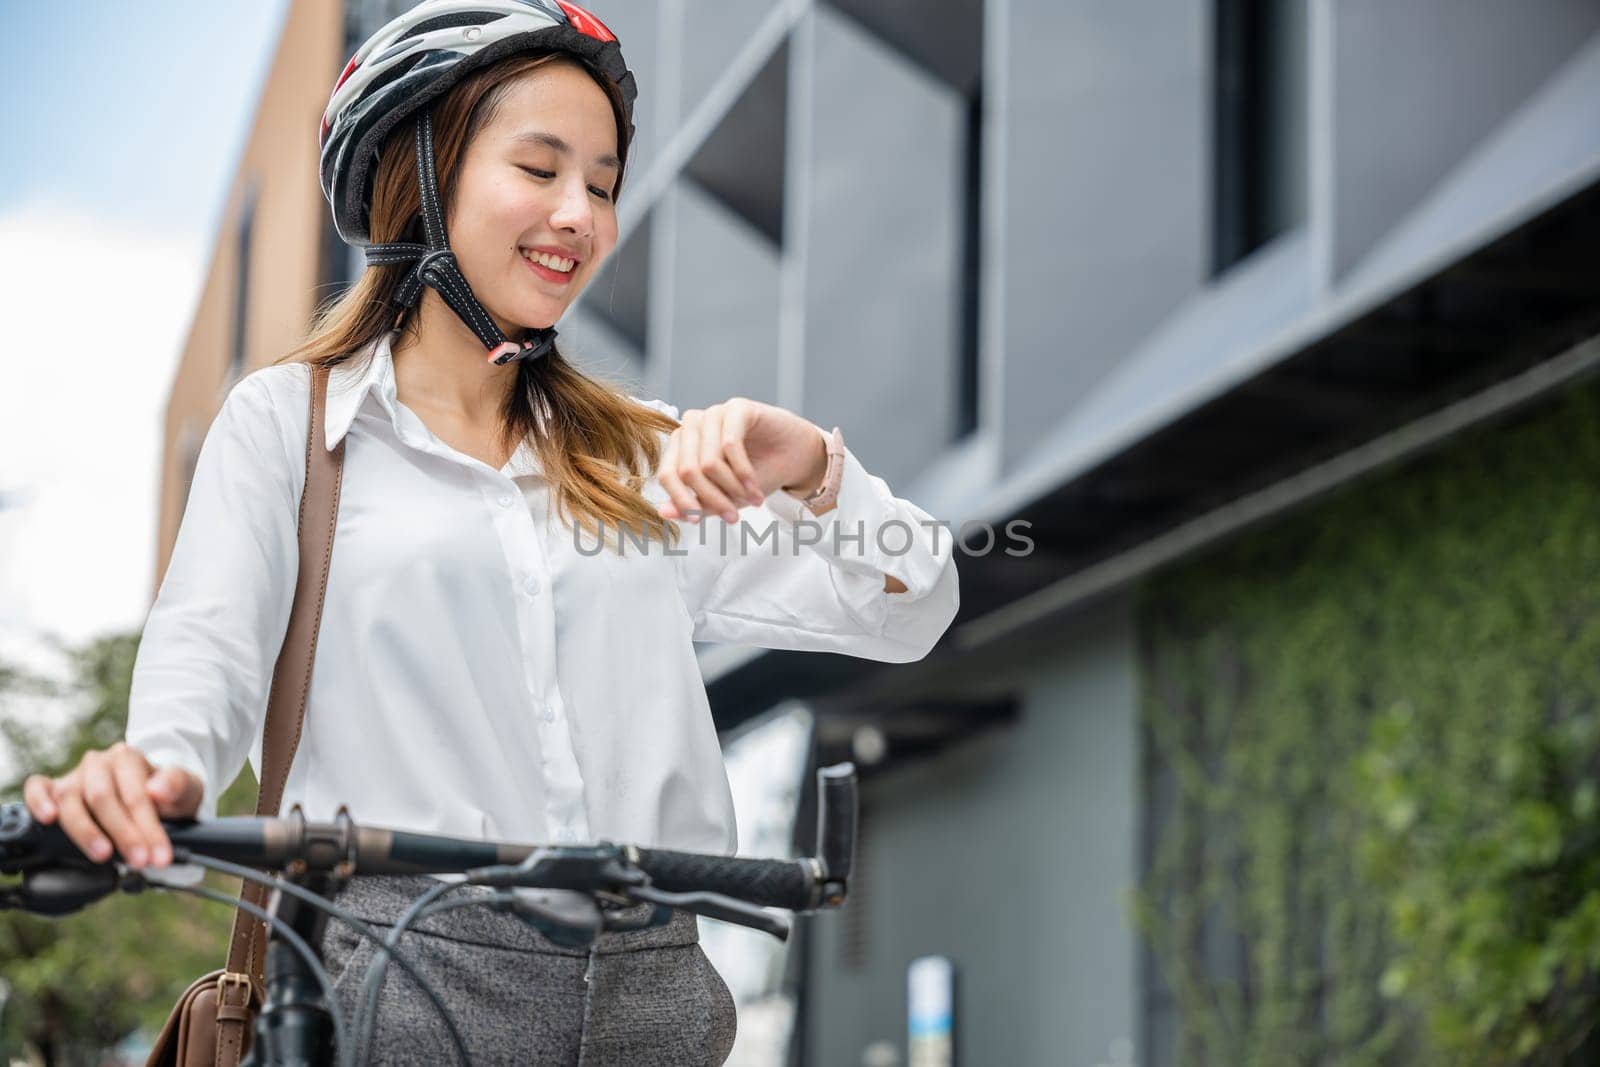 In the morning, a young businesswoman with a bicycle checks the time, embodying the lifestyle of a business commuter. Her professional look and helmet reflect her corporate profession.